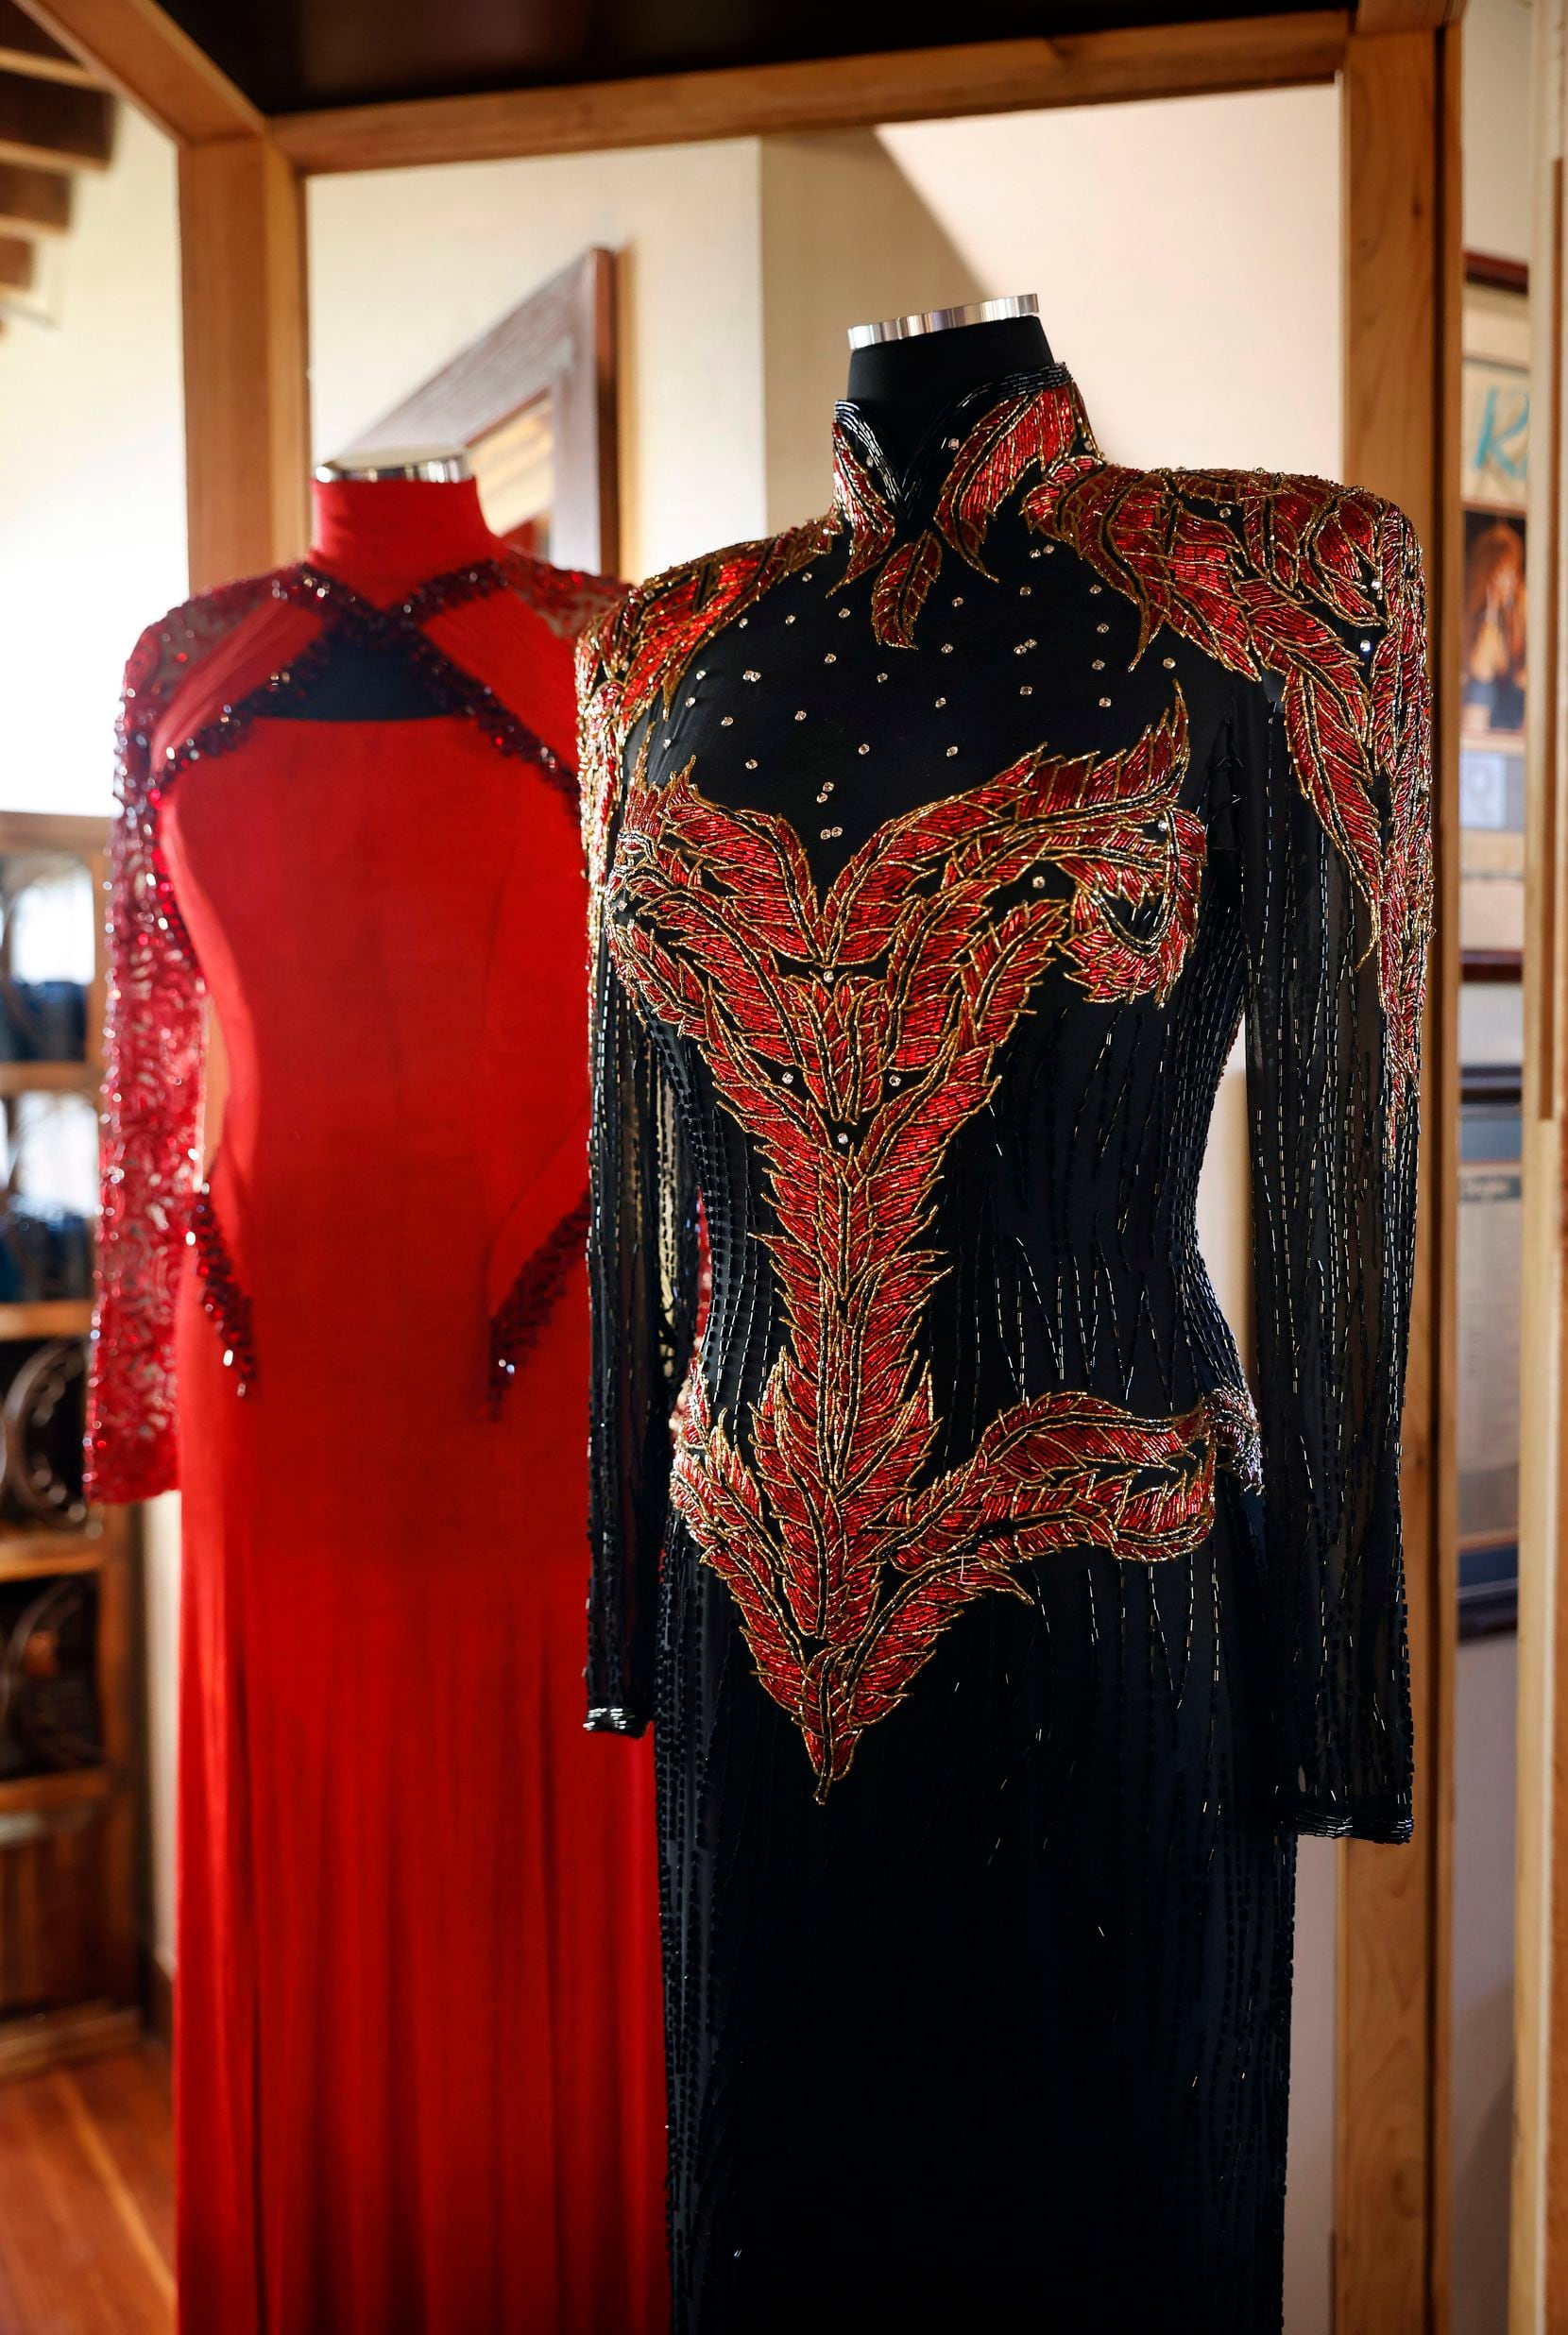 Some of Reba McEntire’s elaborate gowns are on permanent display inside Reba’s Place, a new...